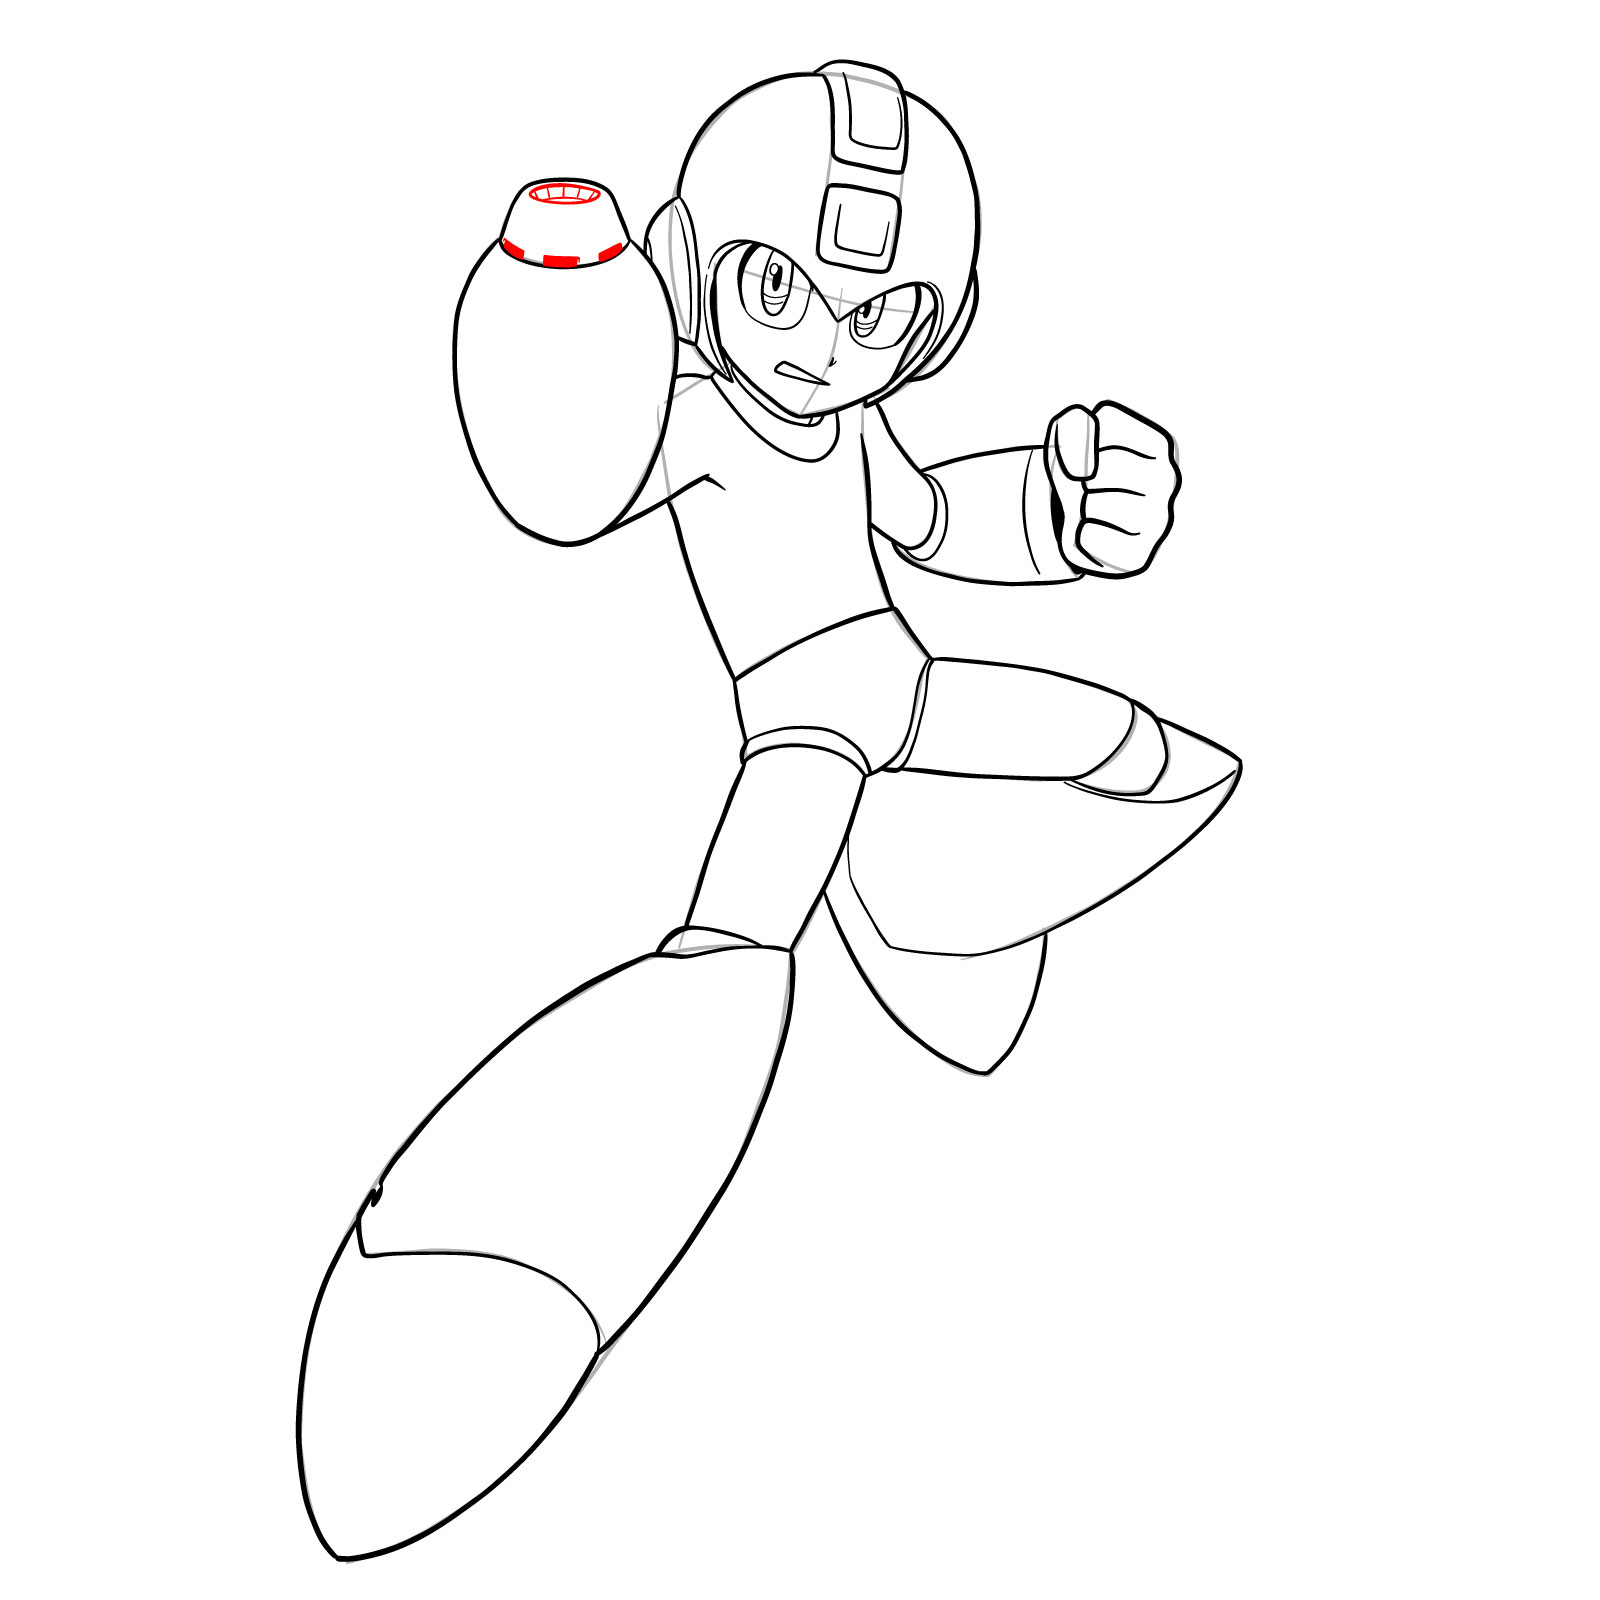 How to draw Mega Man from the 11th game - step 29